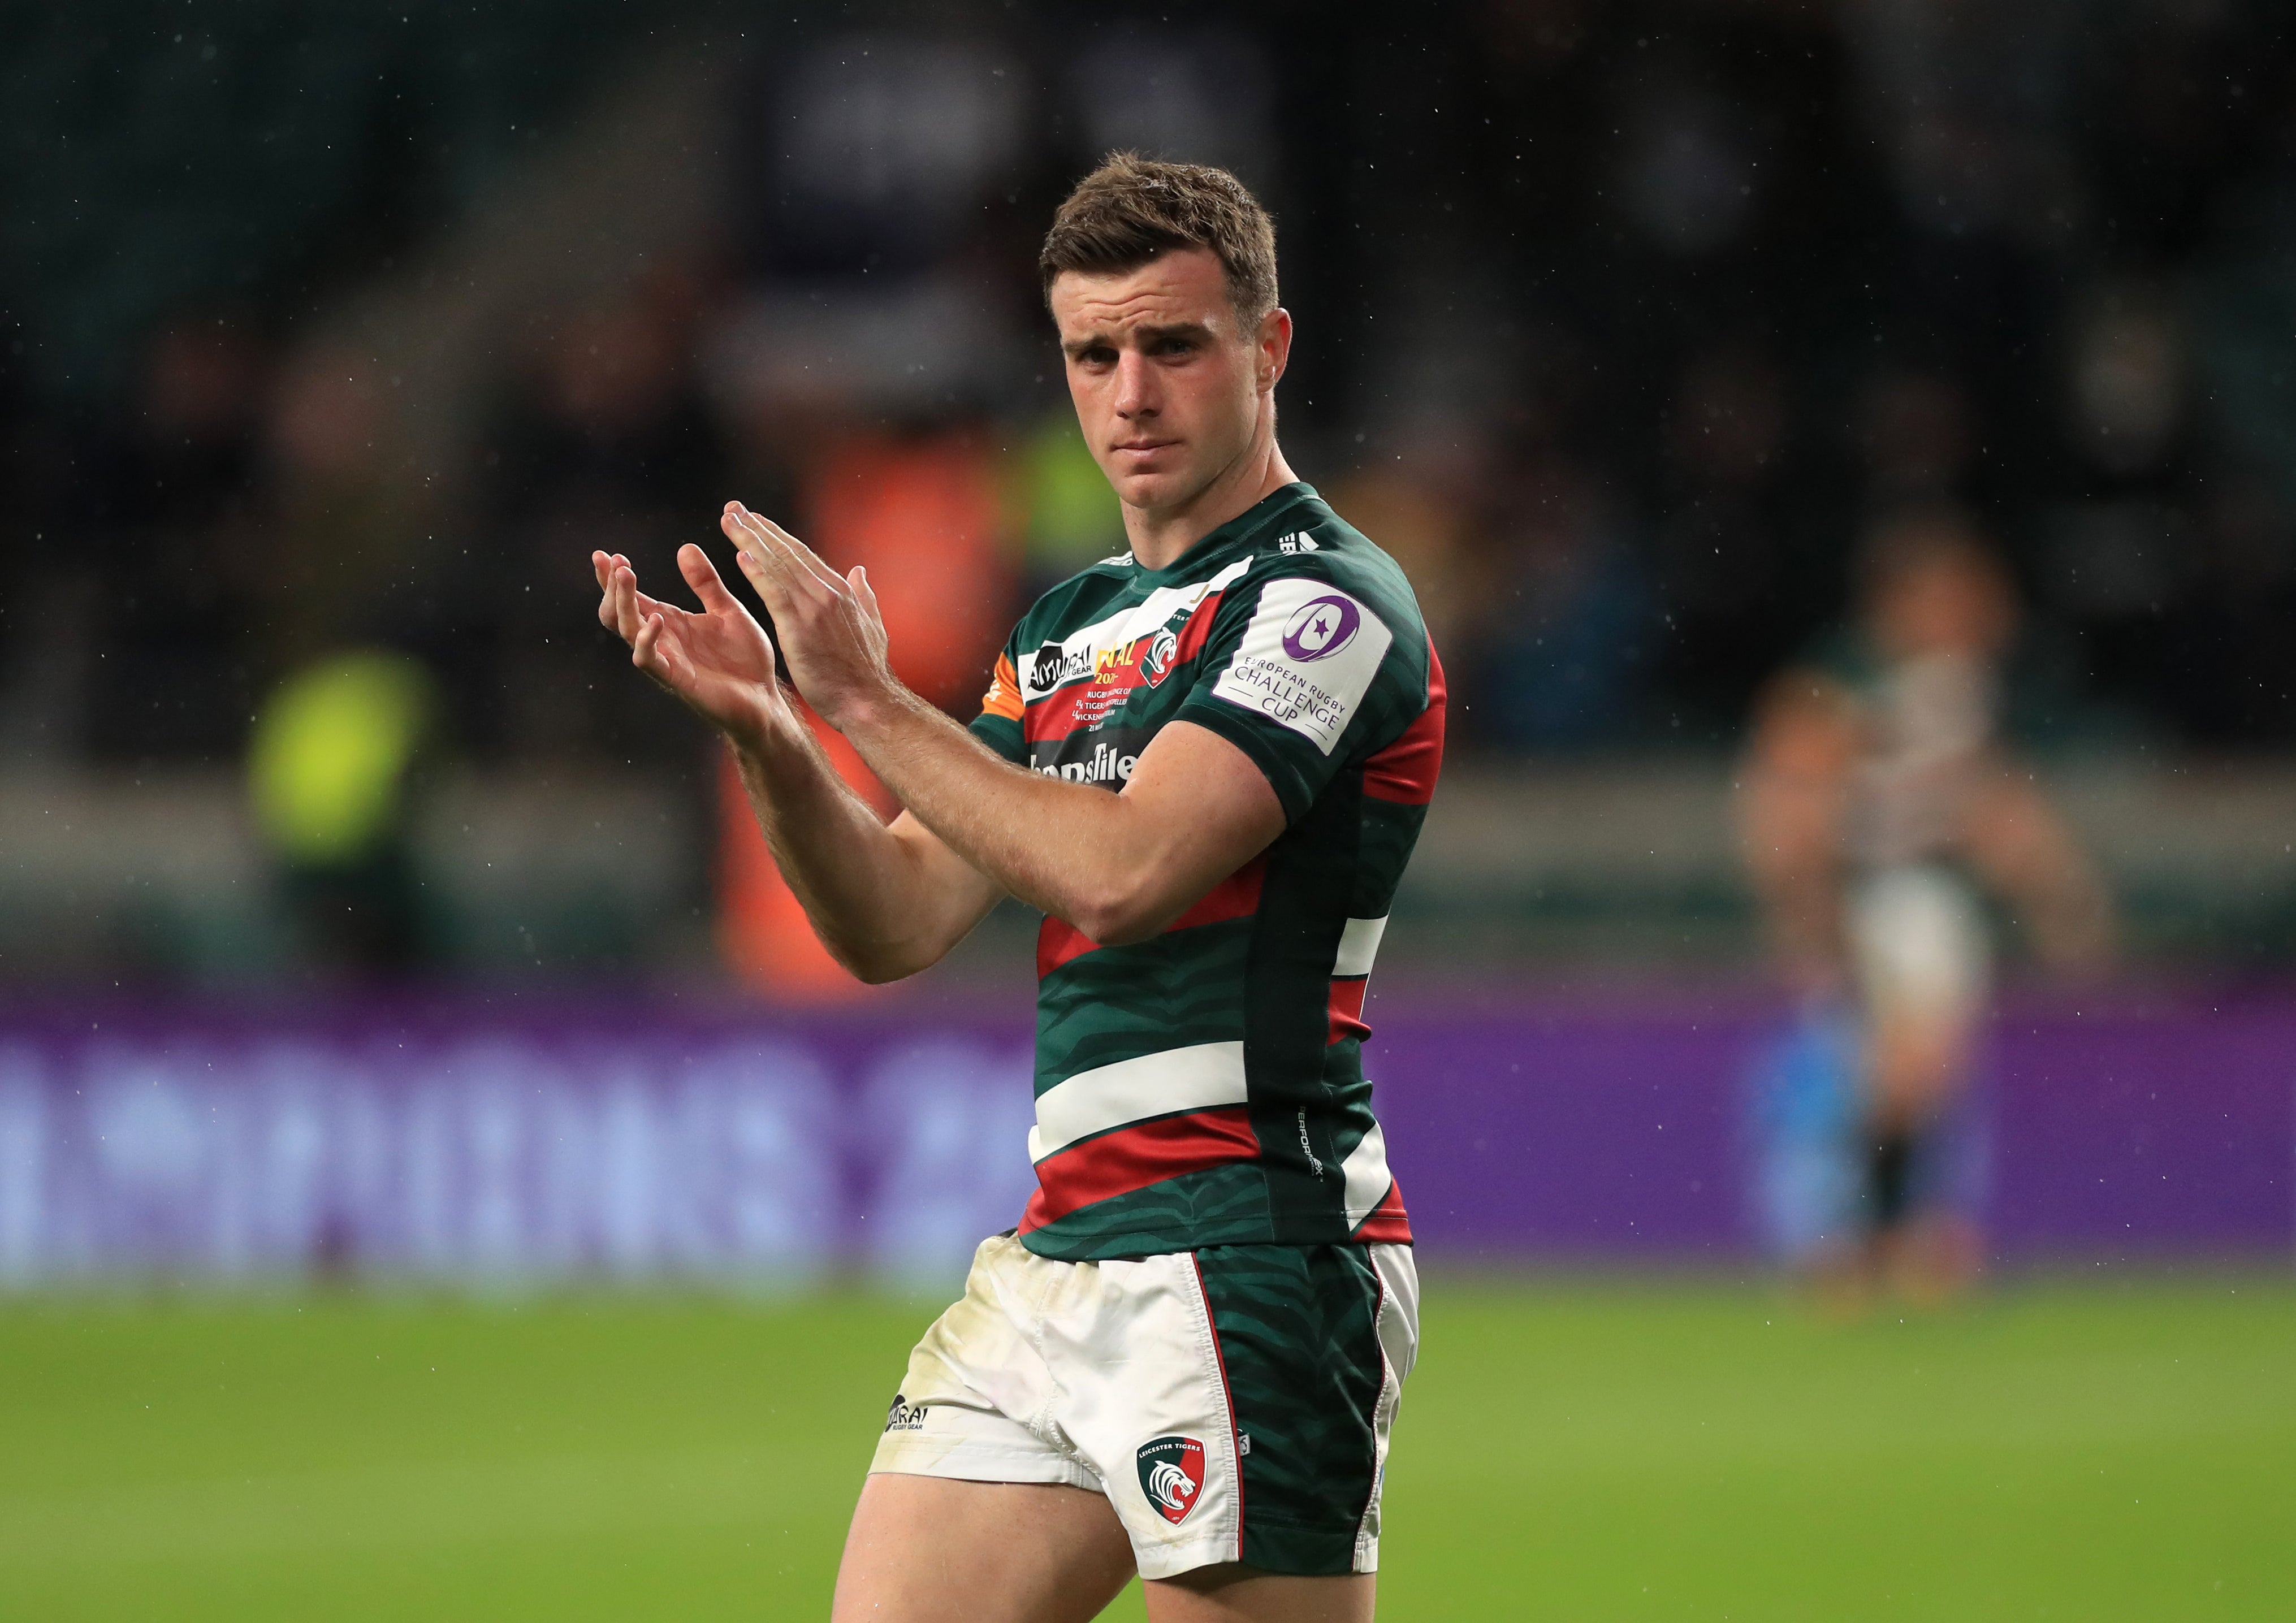 George Ford has praised his young teammates